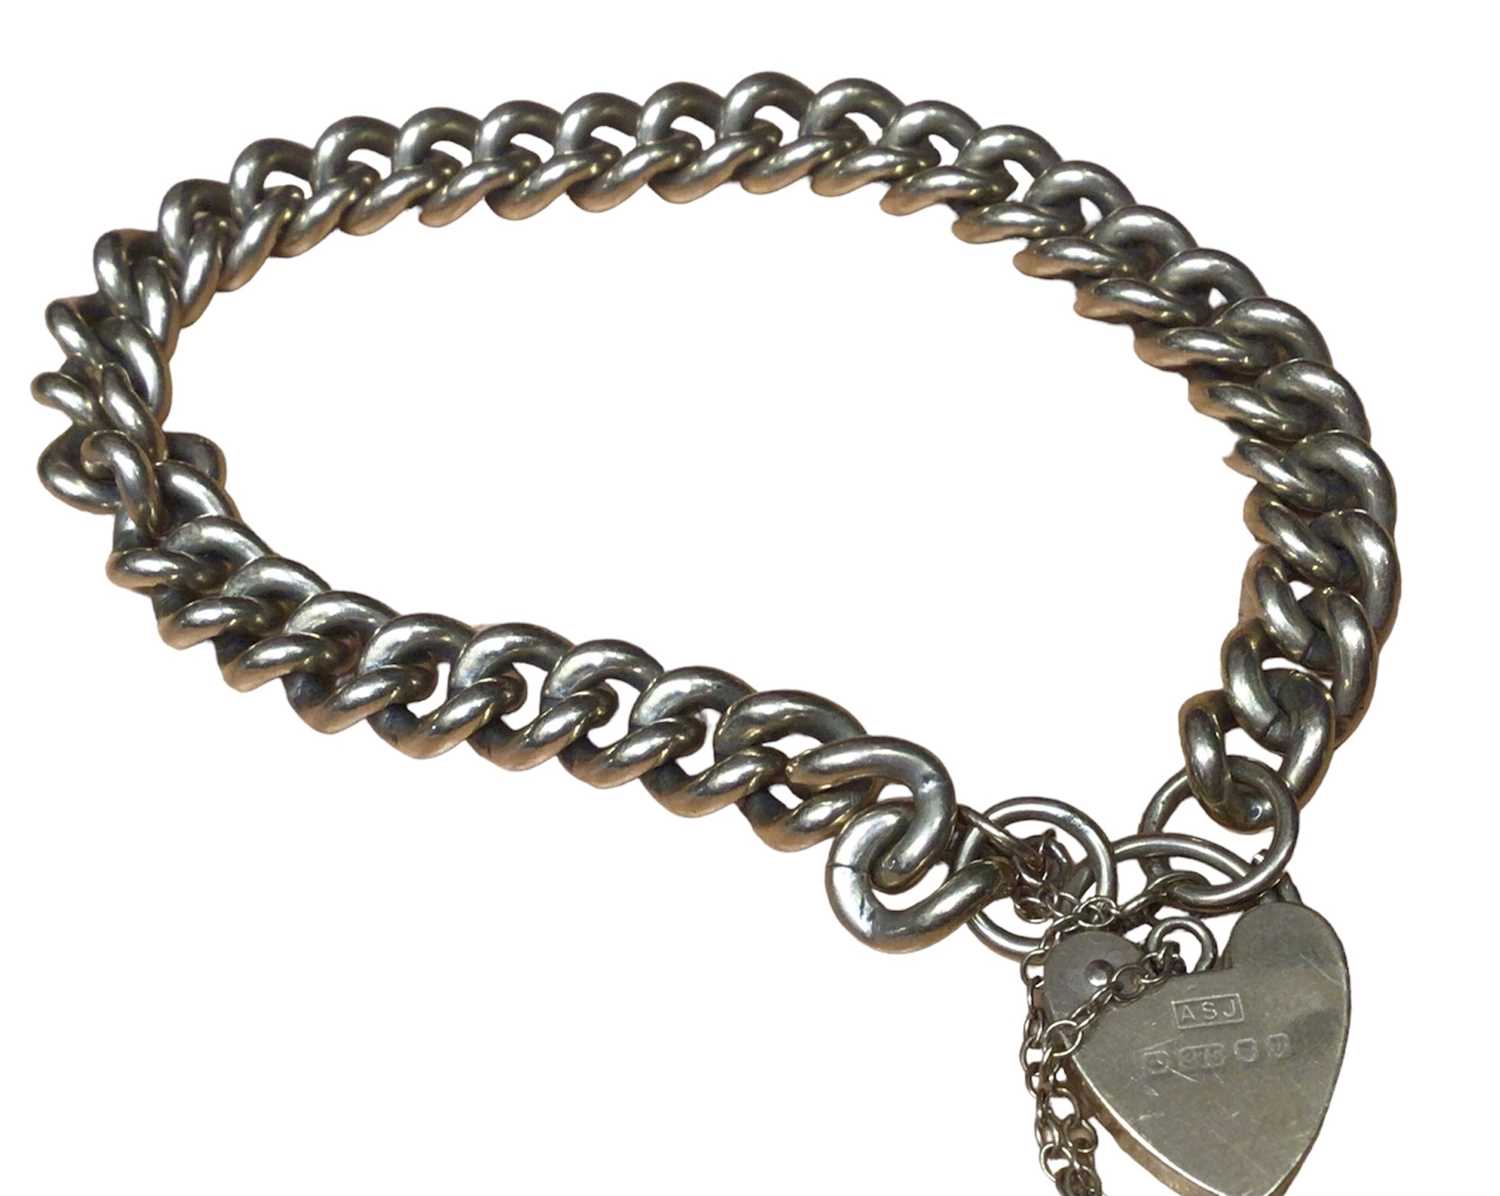 9ct gold curb link chain bracelet with padlock clasp - Image 2 of 2